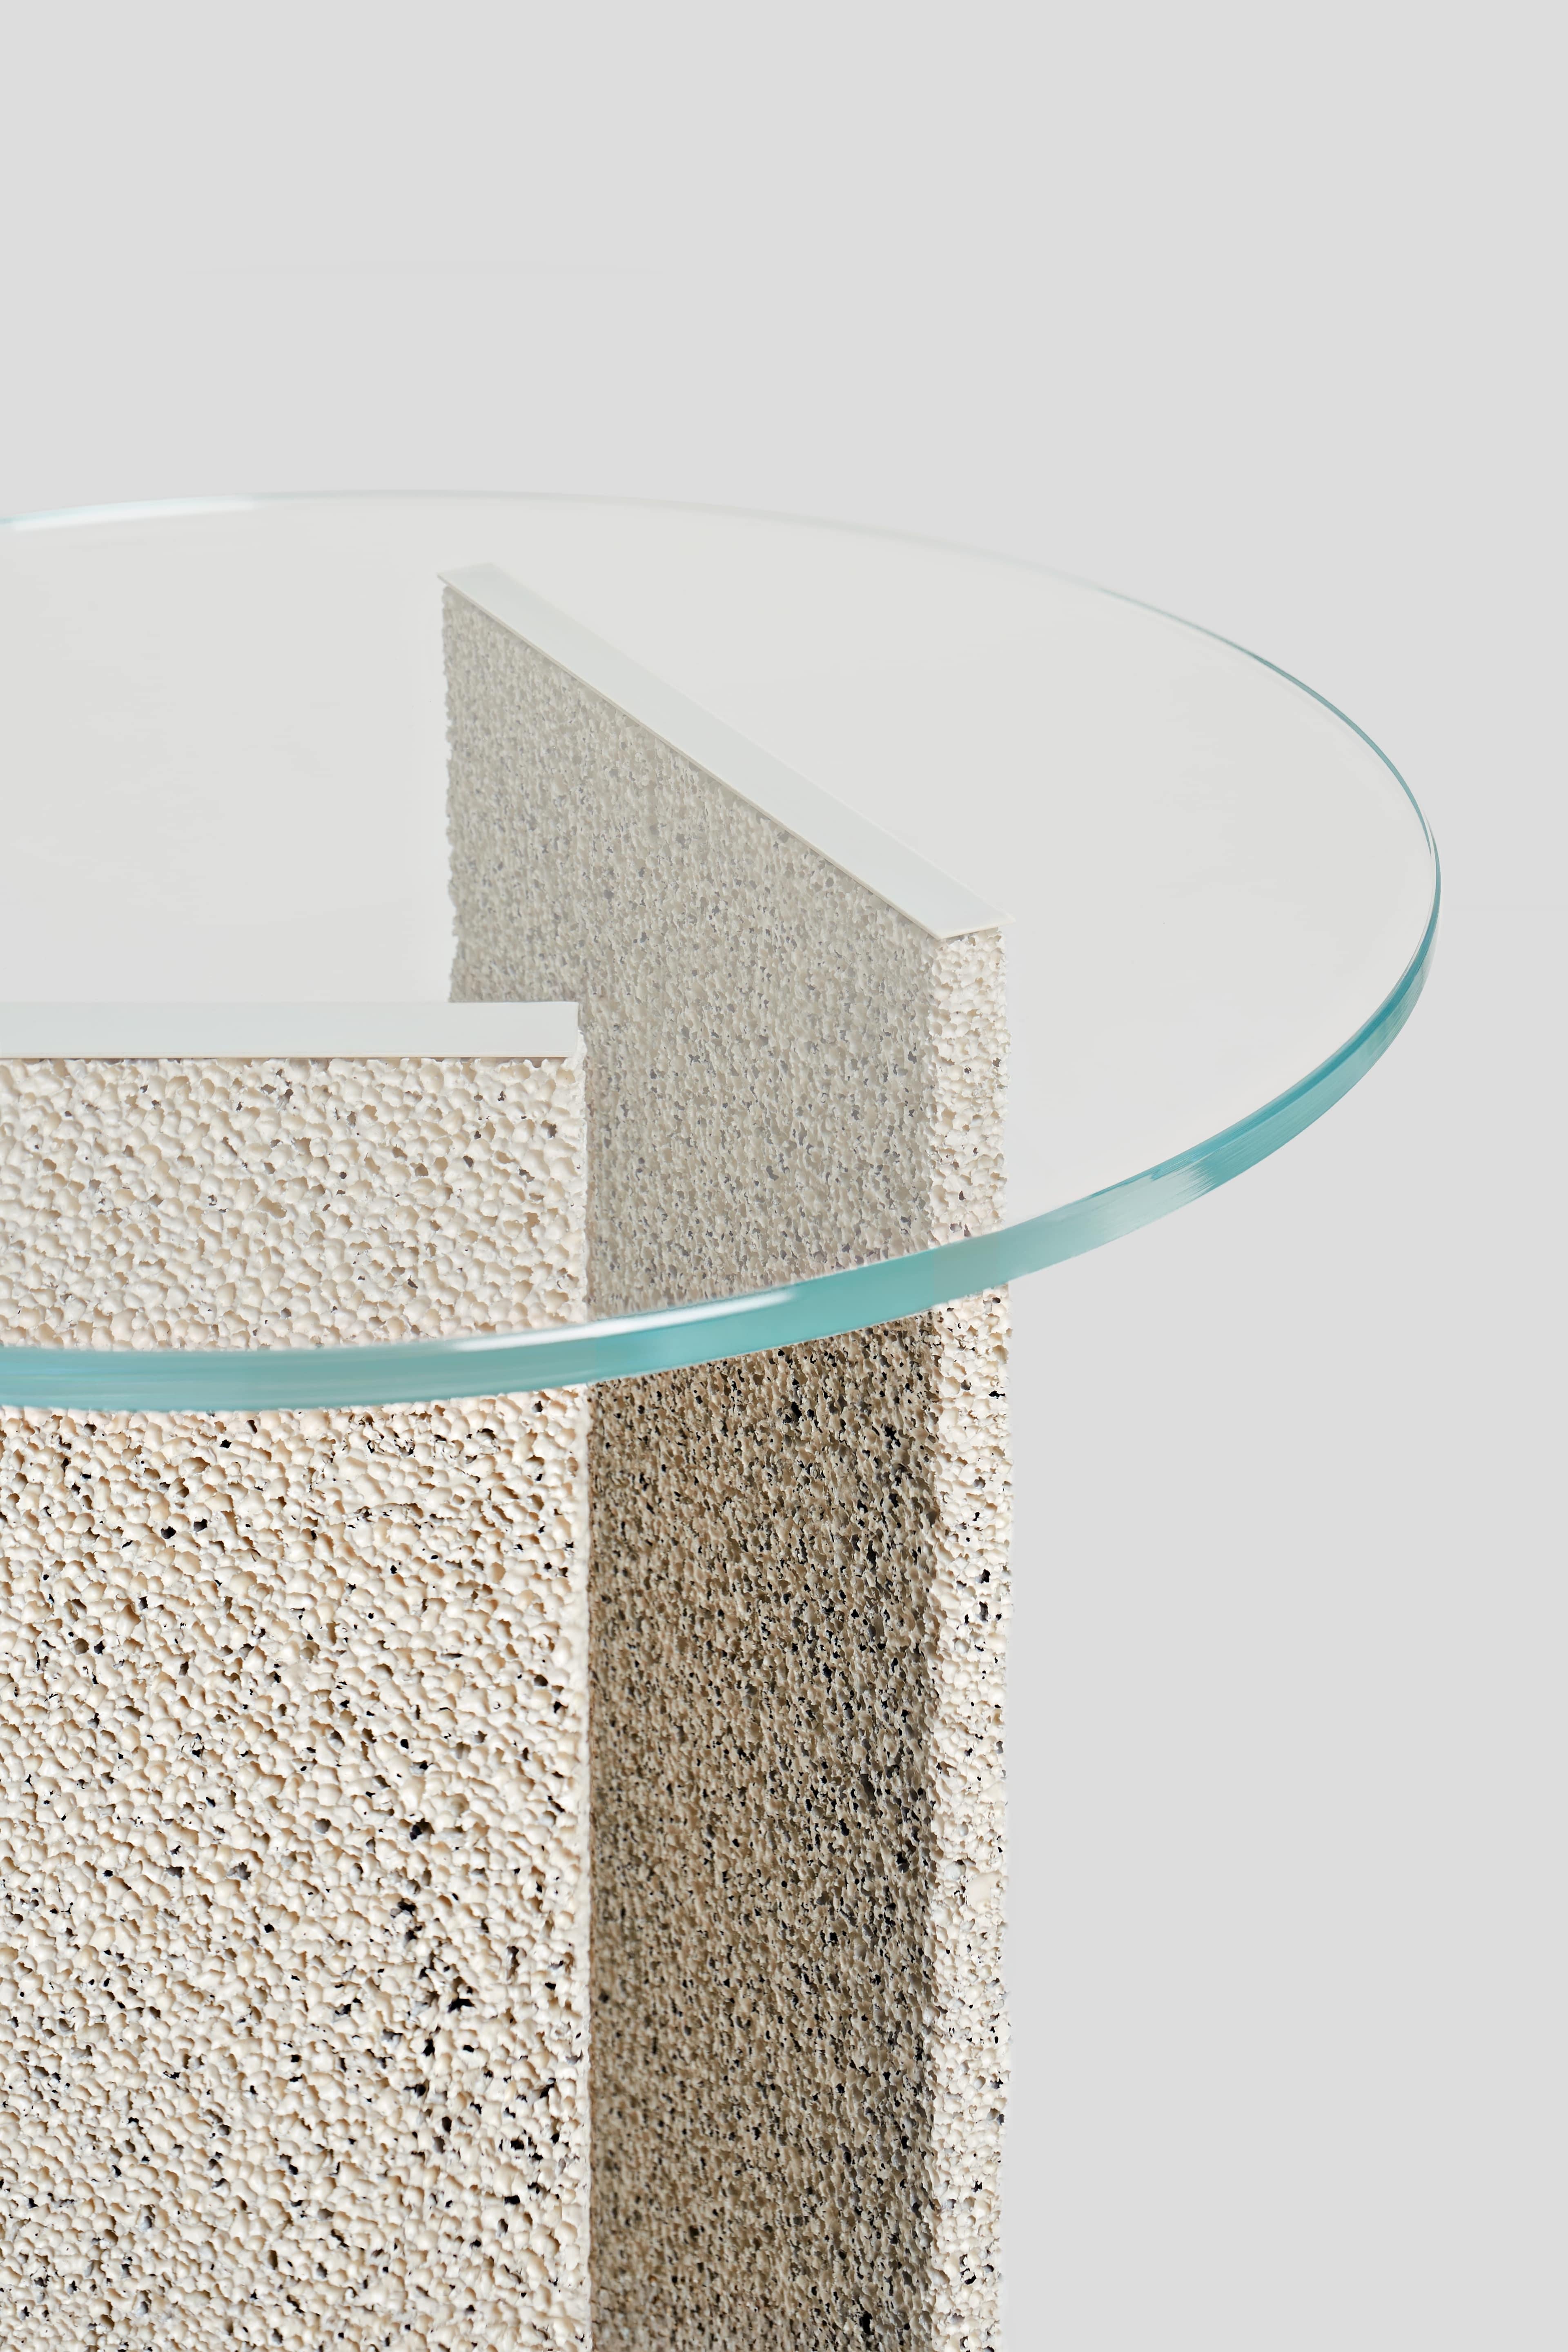 Jordan Keaney Studio is focused on bringing COLOUR and TEXTURE to your space. This side table is handcrafted by Jordan Keaney using a combination of modern digital and sculpting techniques, combined with classic casting and finishing, on top of